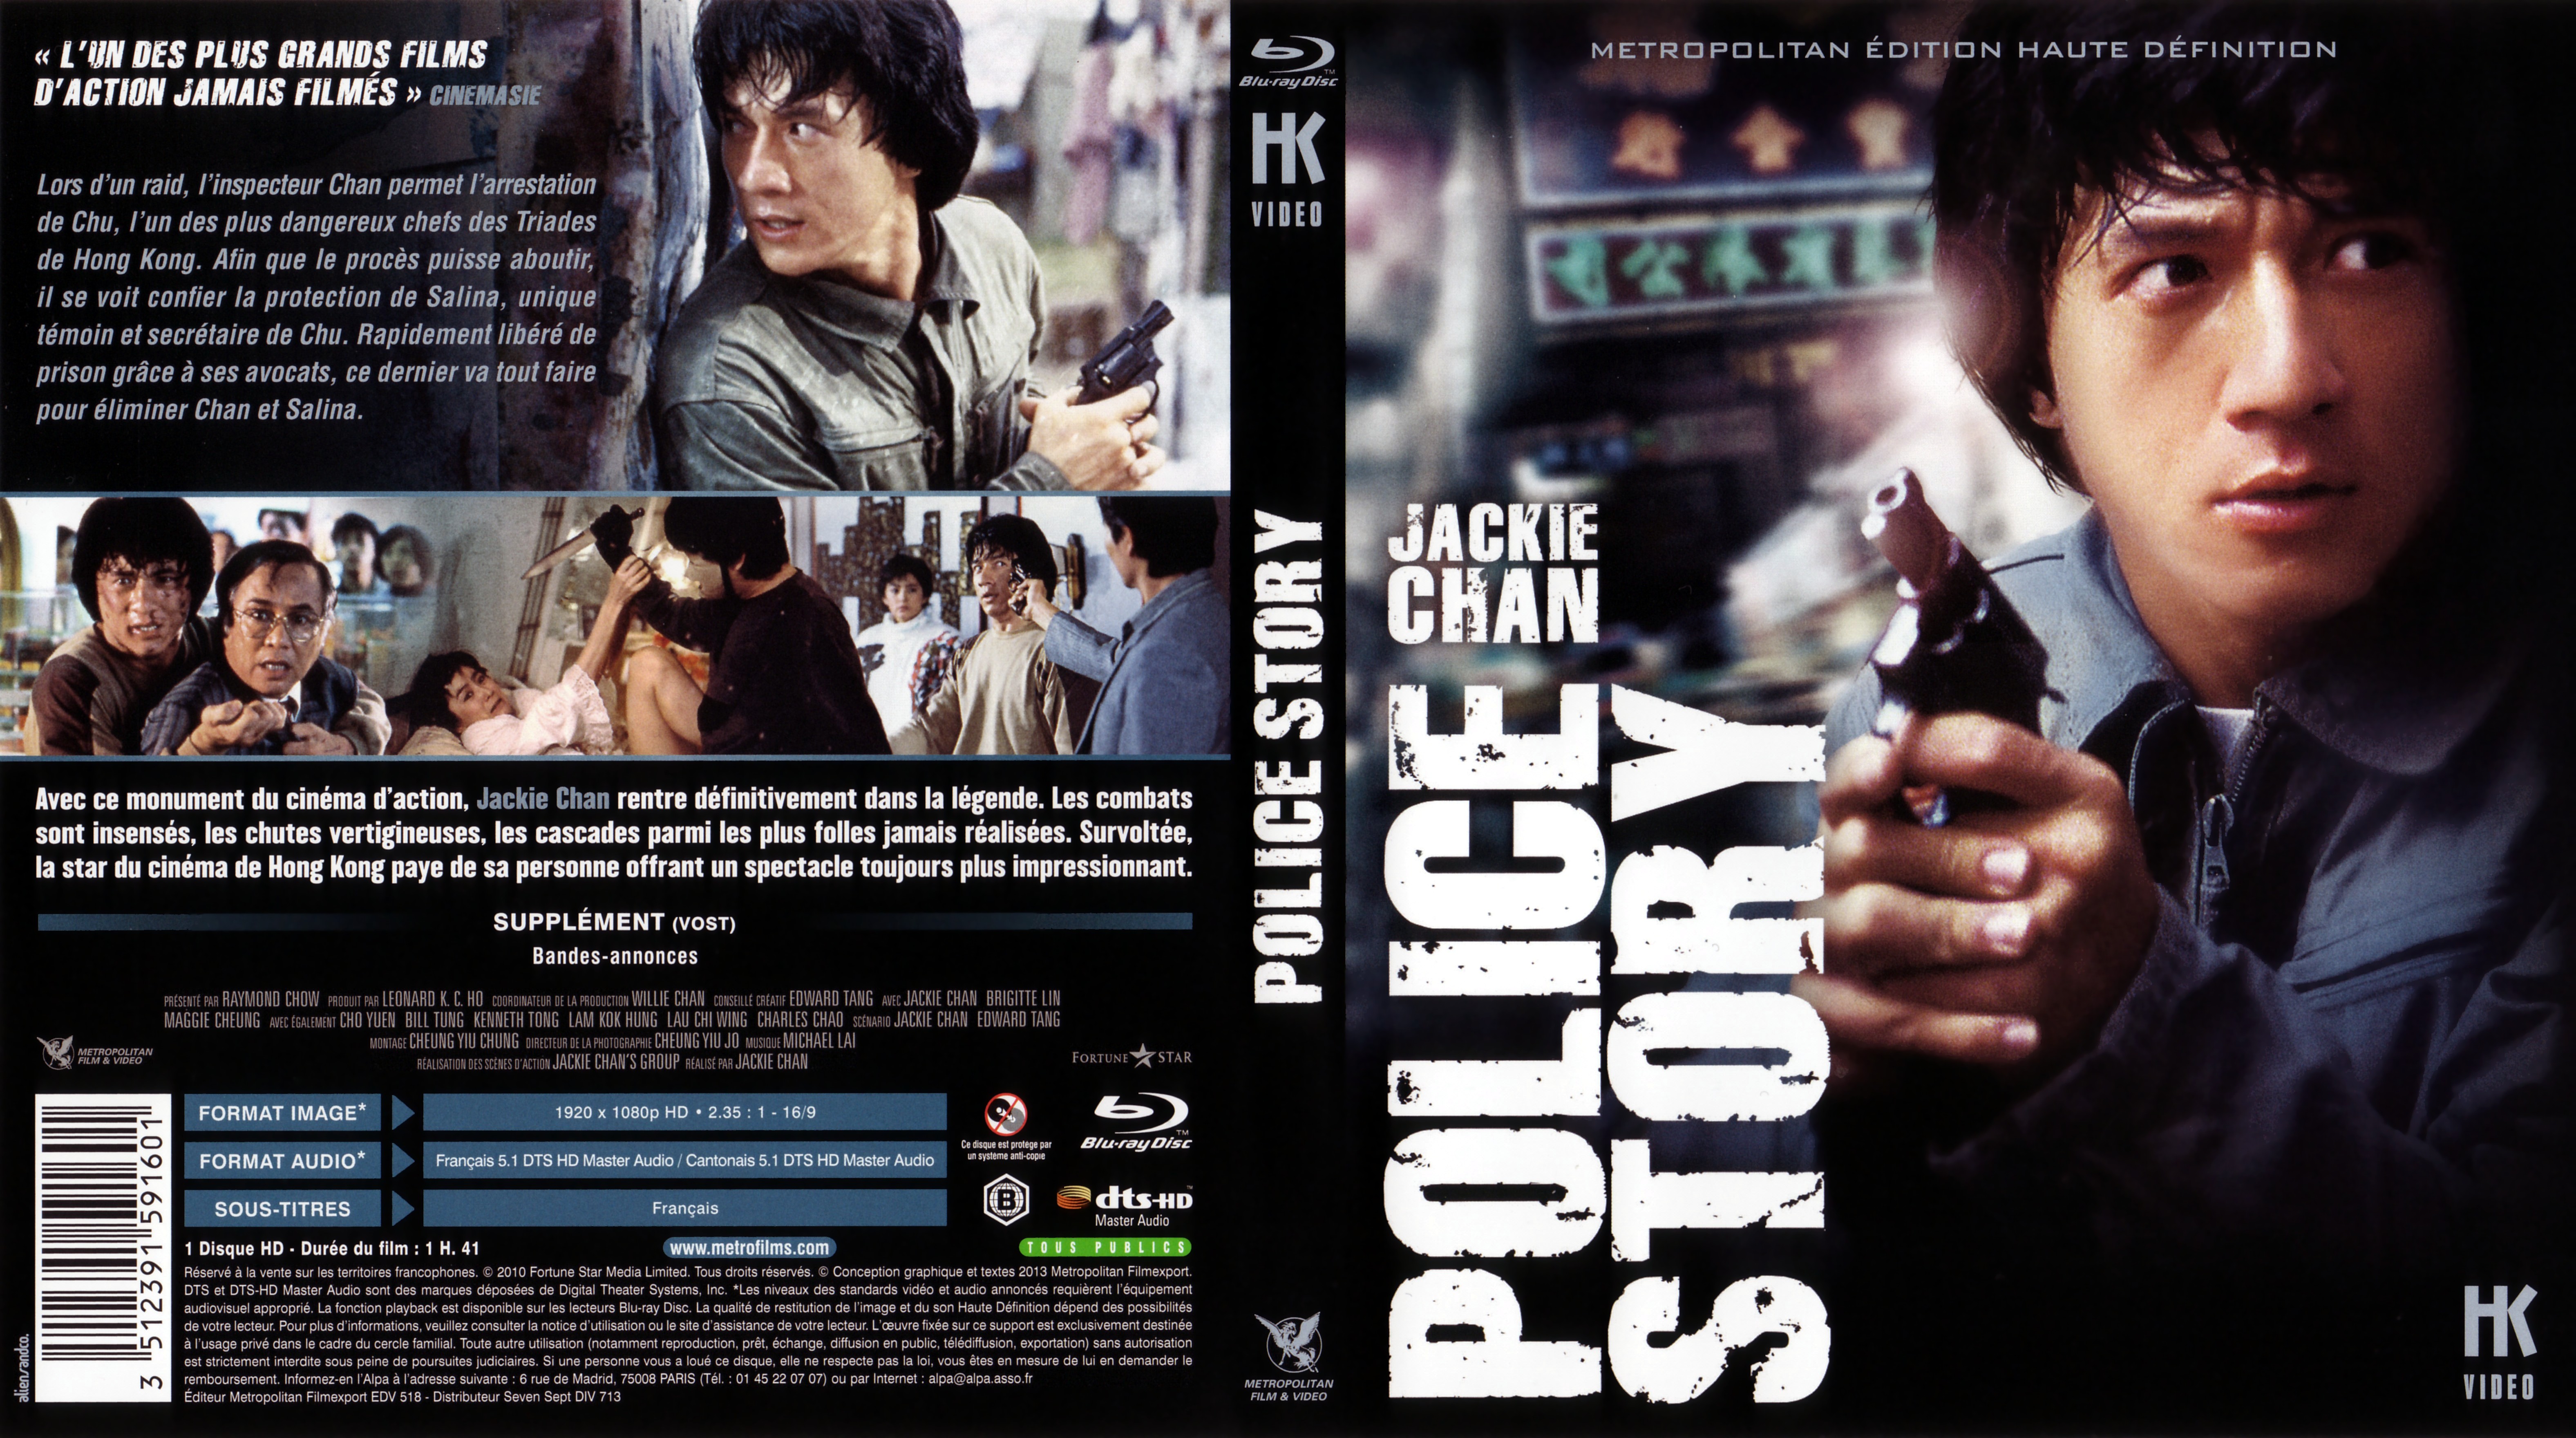 Jaquette DVD Police story (BLU-RAY)